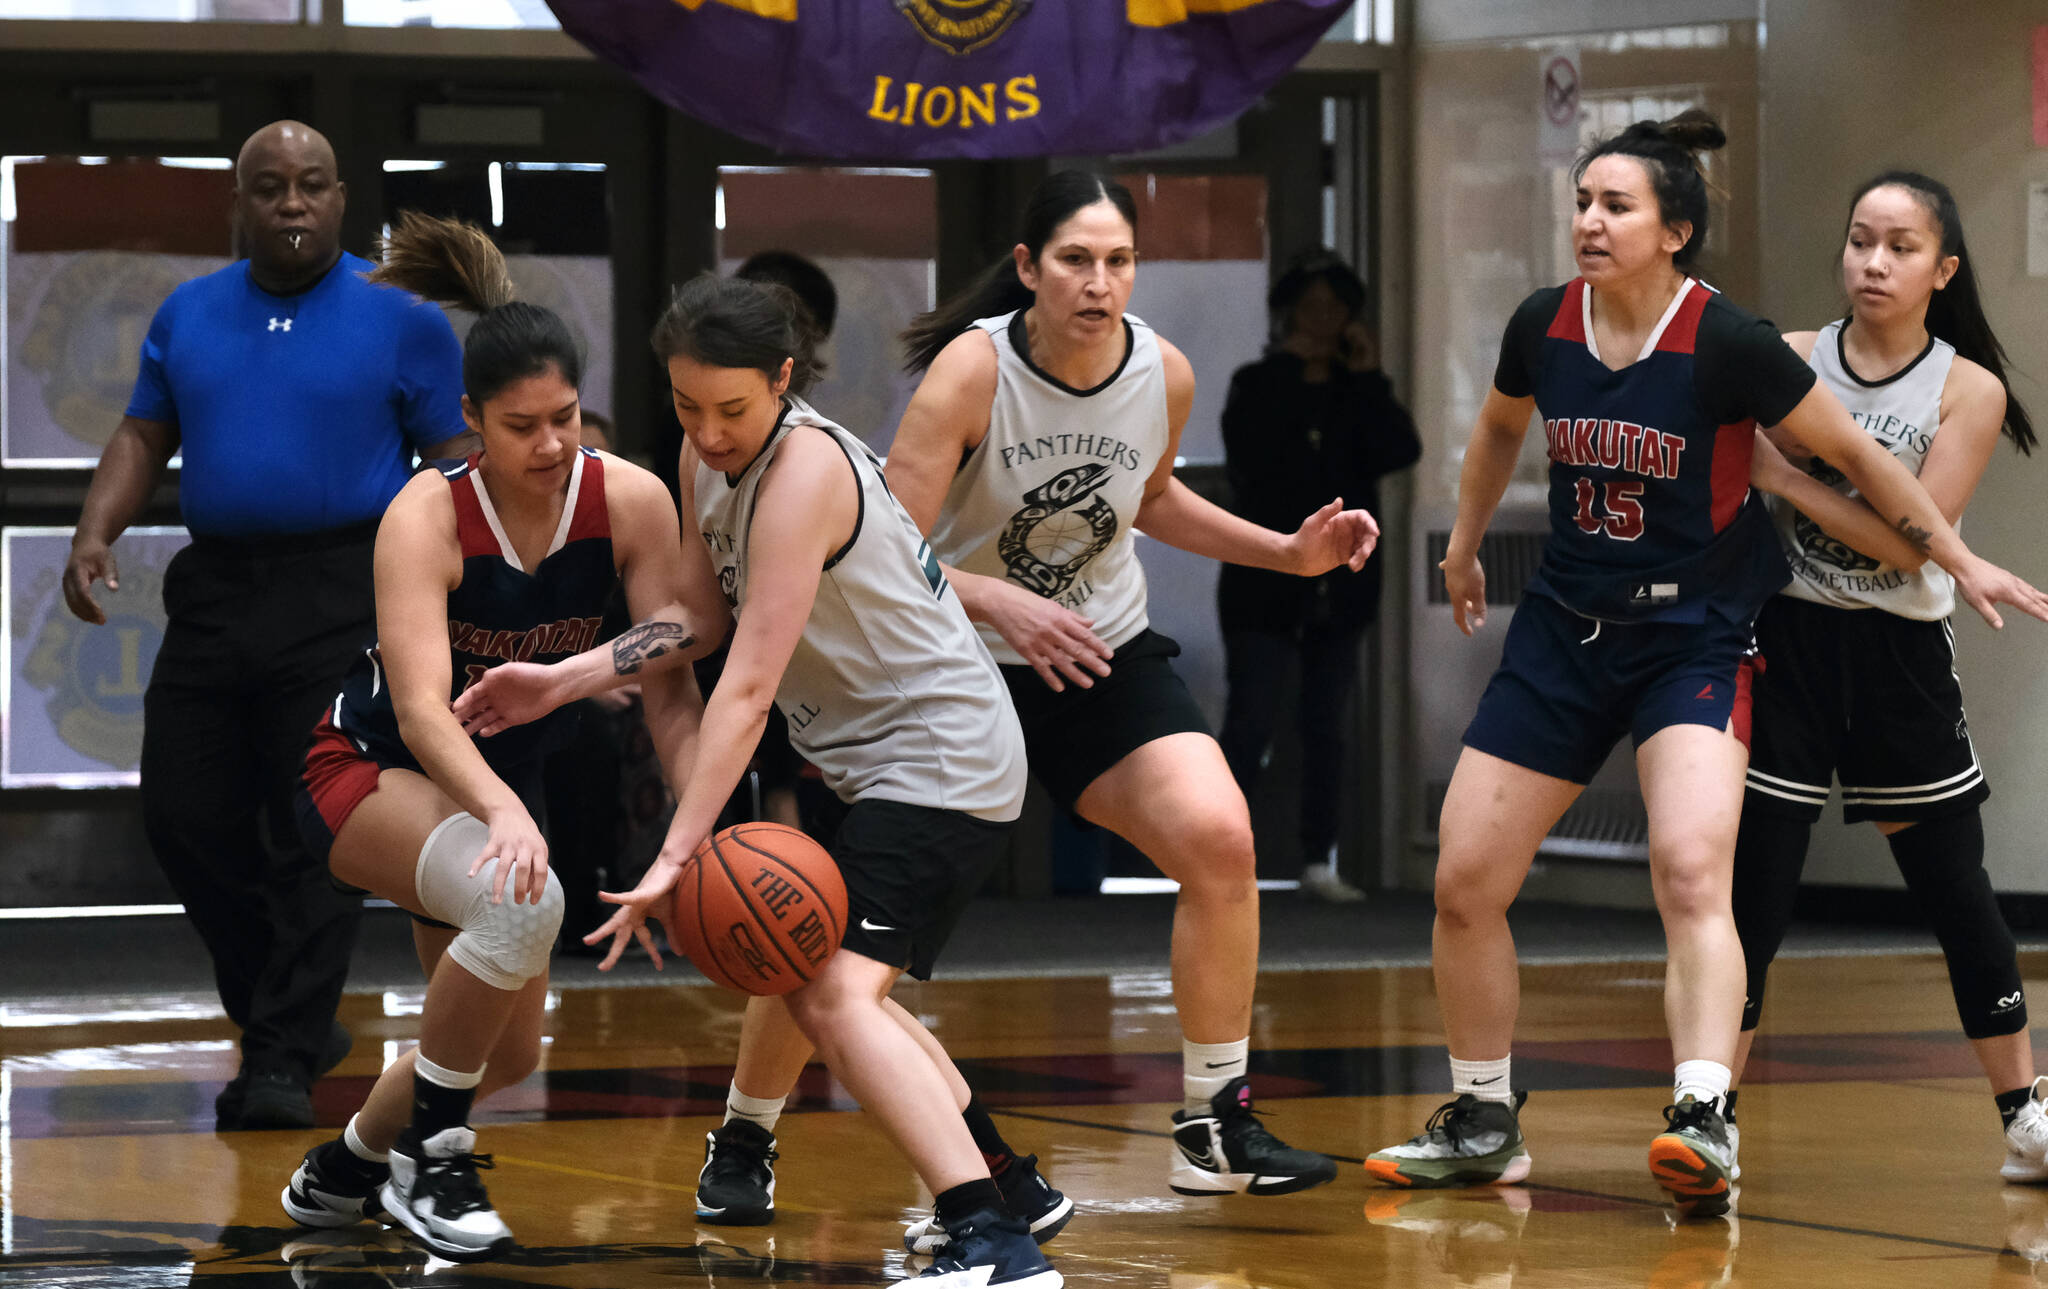 Yakutat’s Trinity Jackson and POW’s Michaela Demmert battle for a ball as POW’s Tina Steffen, Yakutat’s Lorena Williams and POW’s Lillian Borromeo look on during the Gold Medal Basketball Tournament, Saturday, March 25, at Juneau-Douglas High School: Yadaa.at Kalé. (Klas Stolpe/For the Juneau Empire)